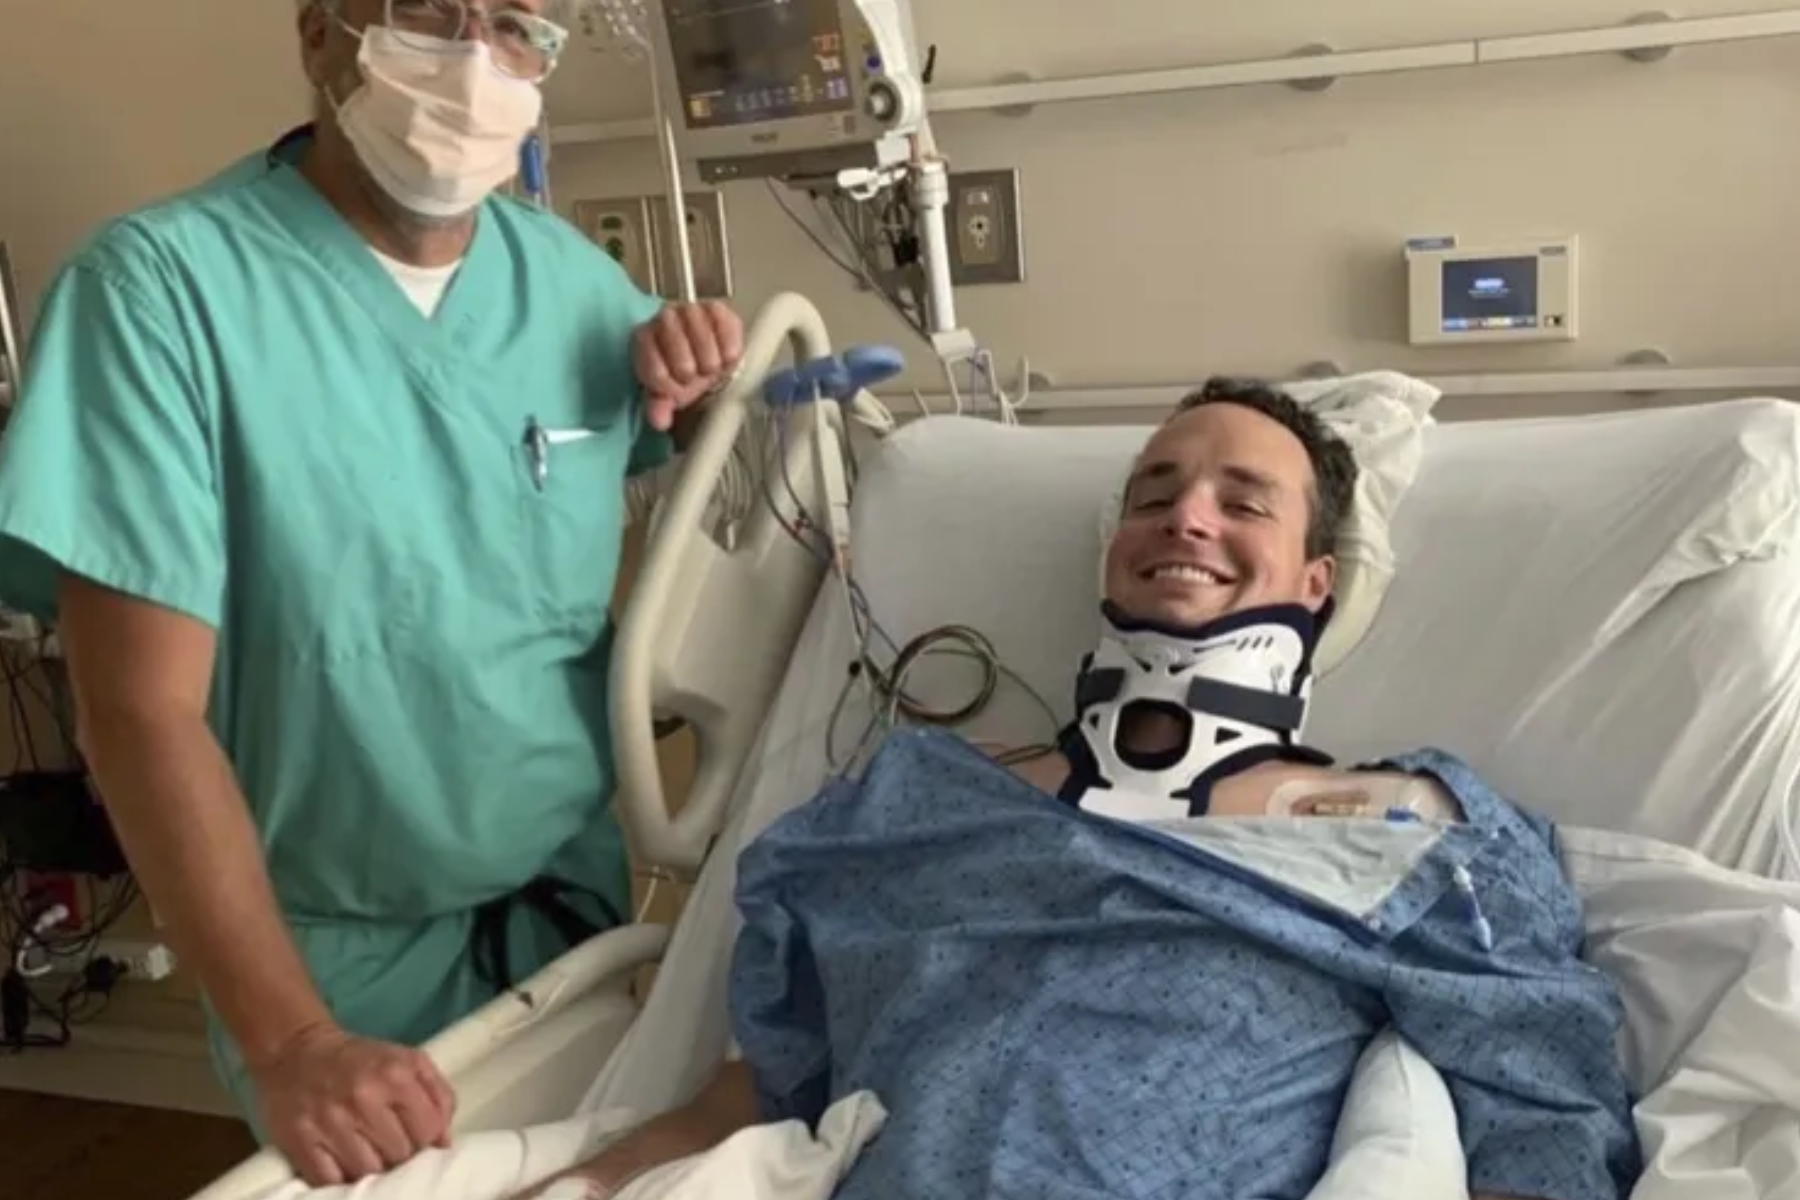 Spencer Brown is laying on a bed, wearing a neck brace, and his doctor on his side